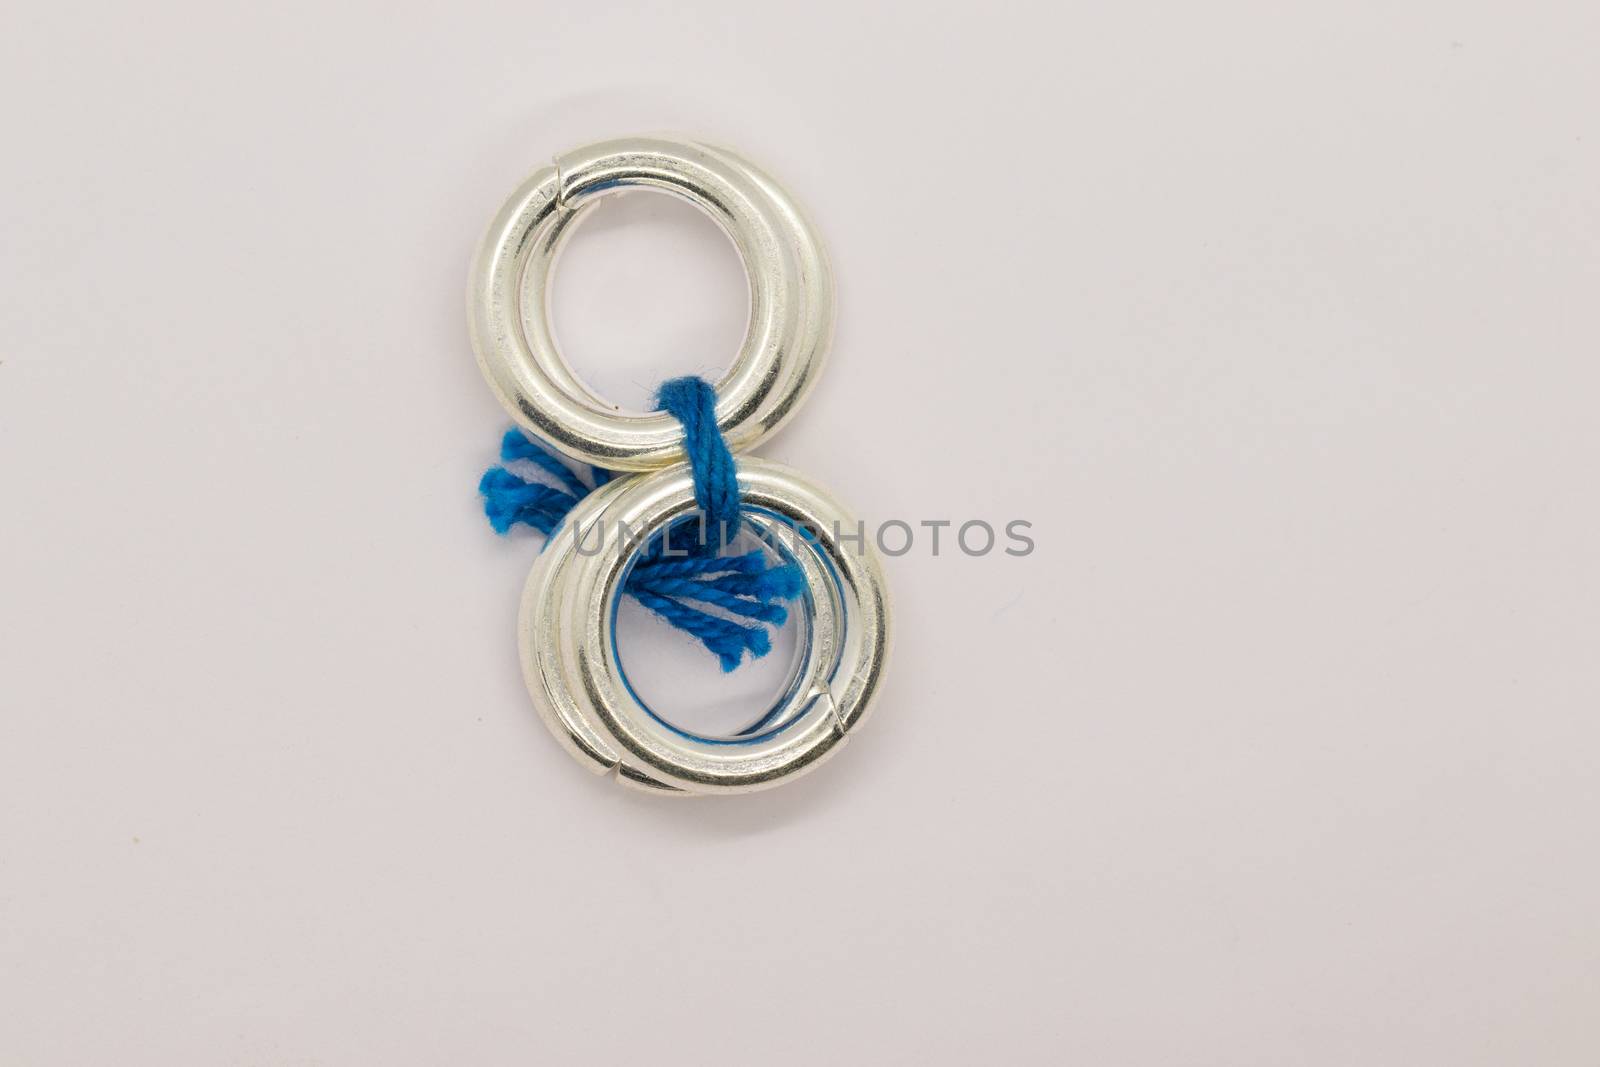 two pair leg silver rings with blue threats on white background